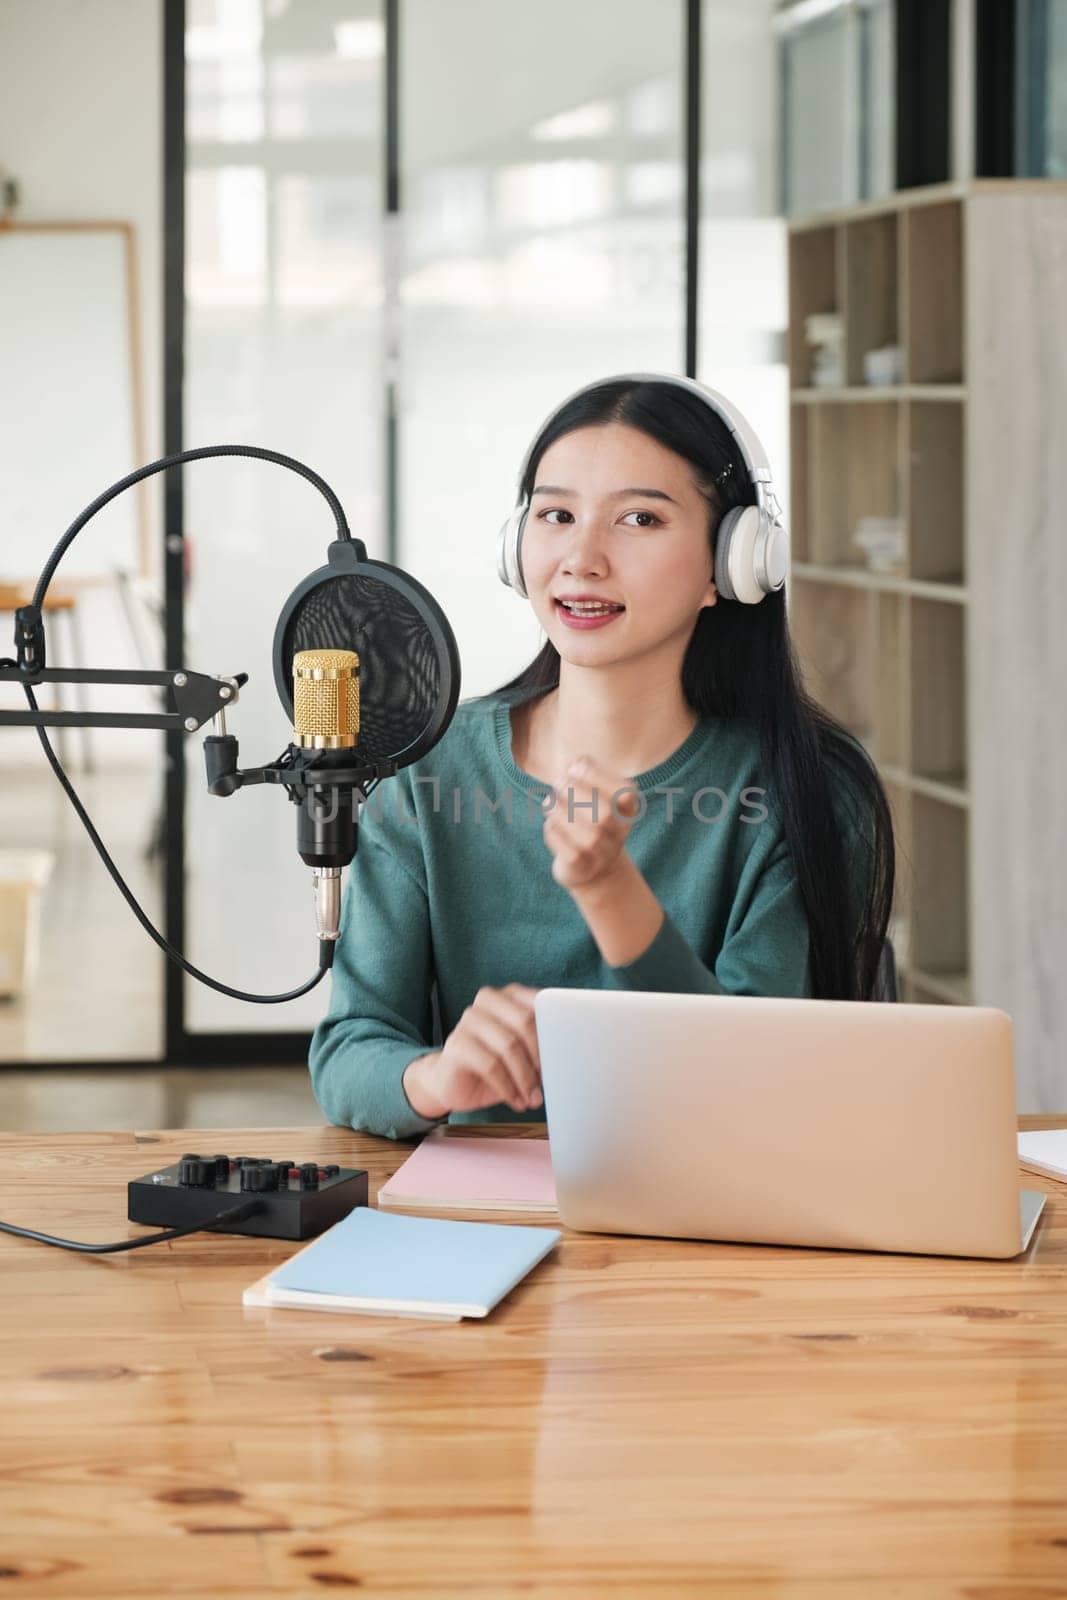 A woman is sitting at a desk with a microphone and a laptop. She is wearing headphones and she is recording a podcast. The room has a wooden floor and a few books on the desk